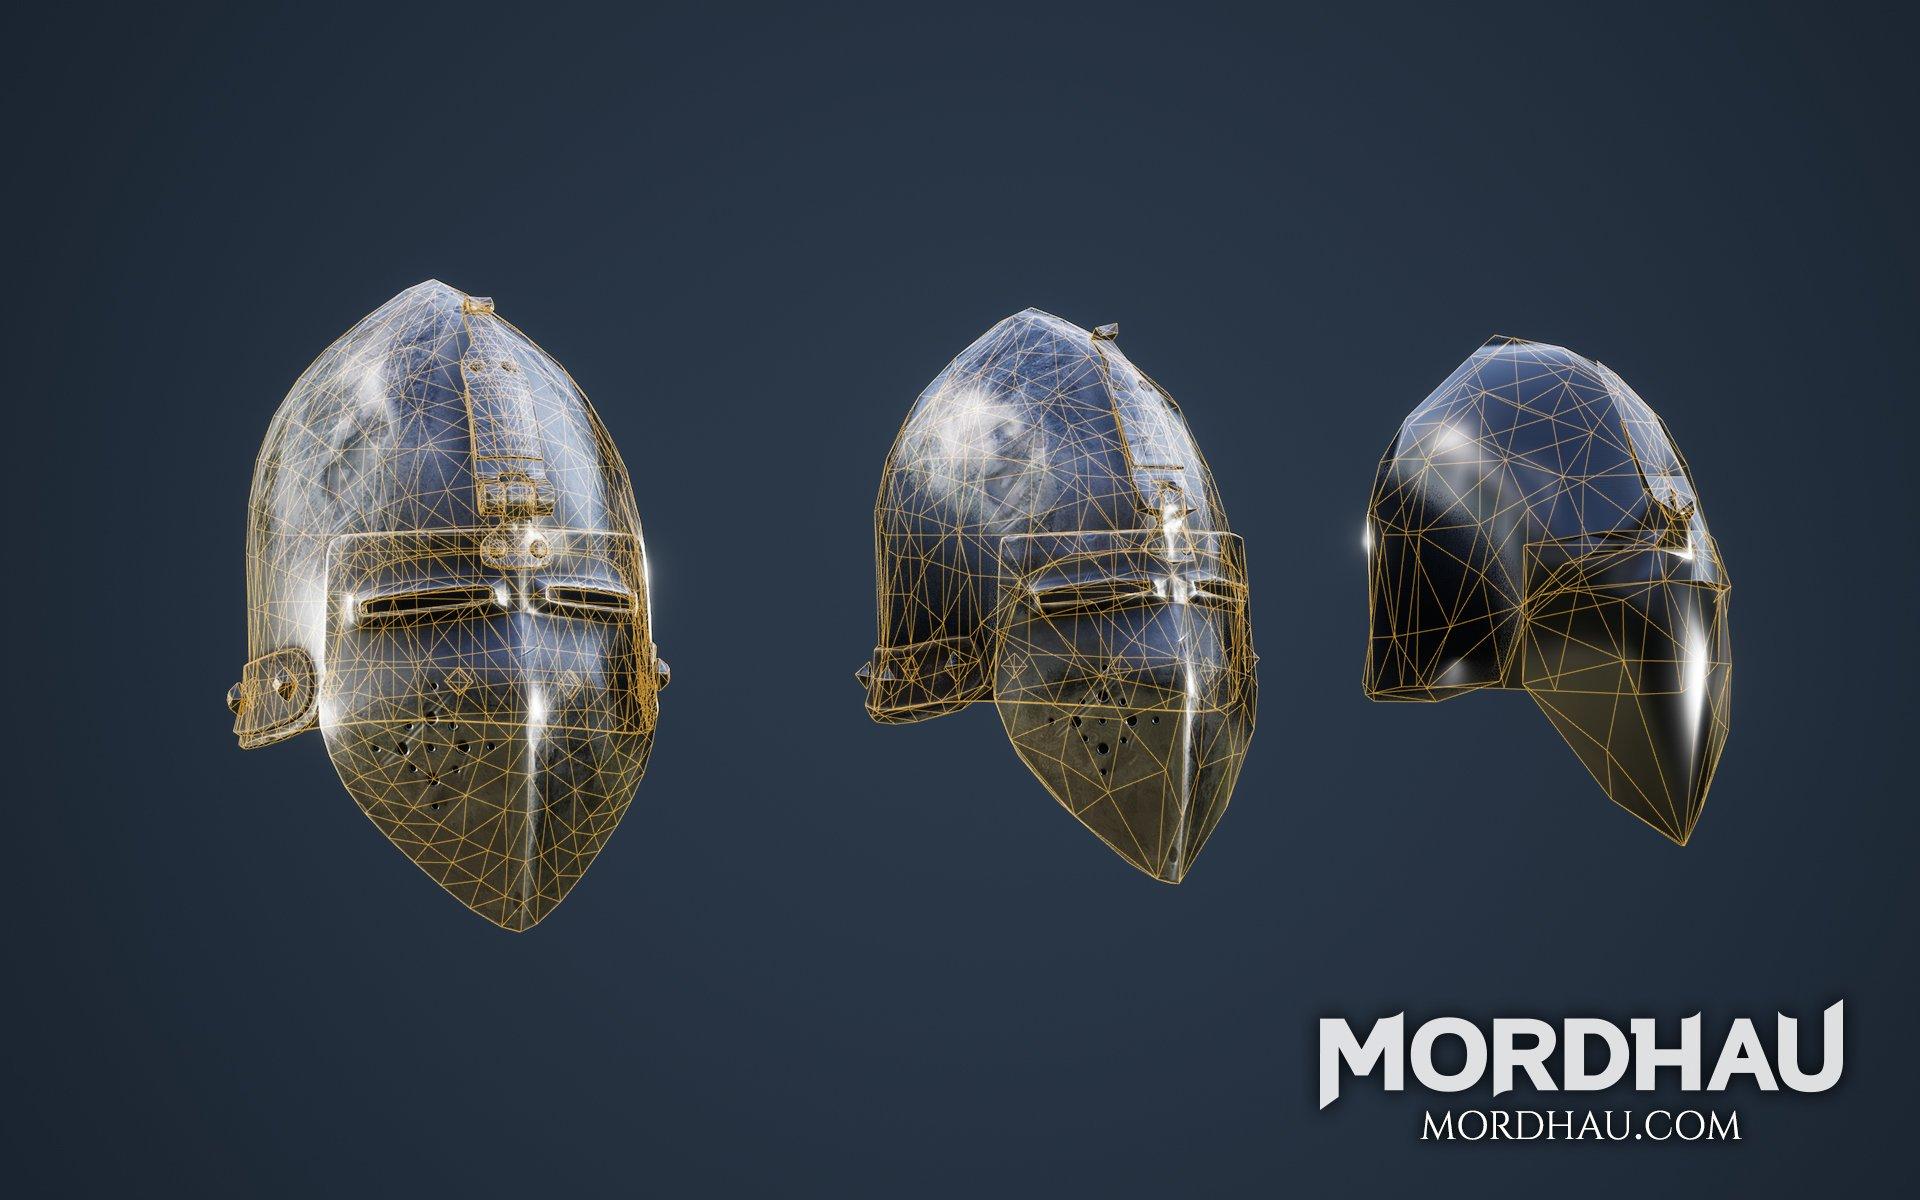 MORDHAU've been working on optimizing the game, as